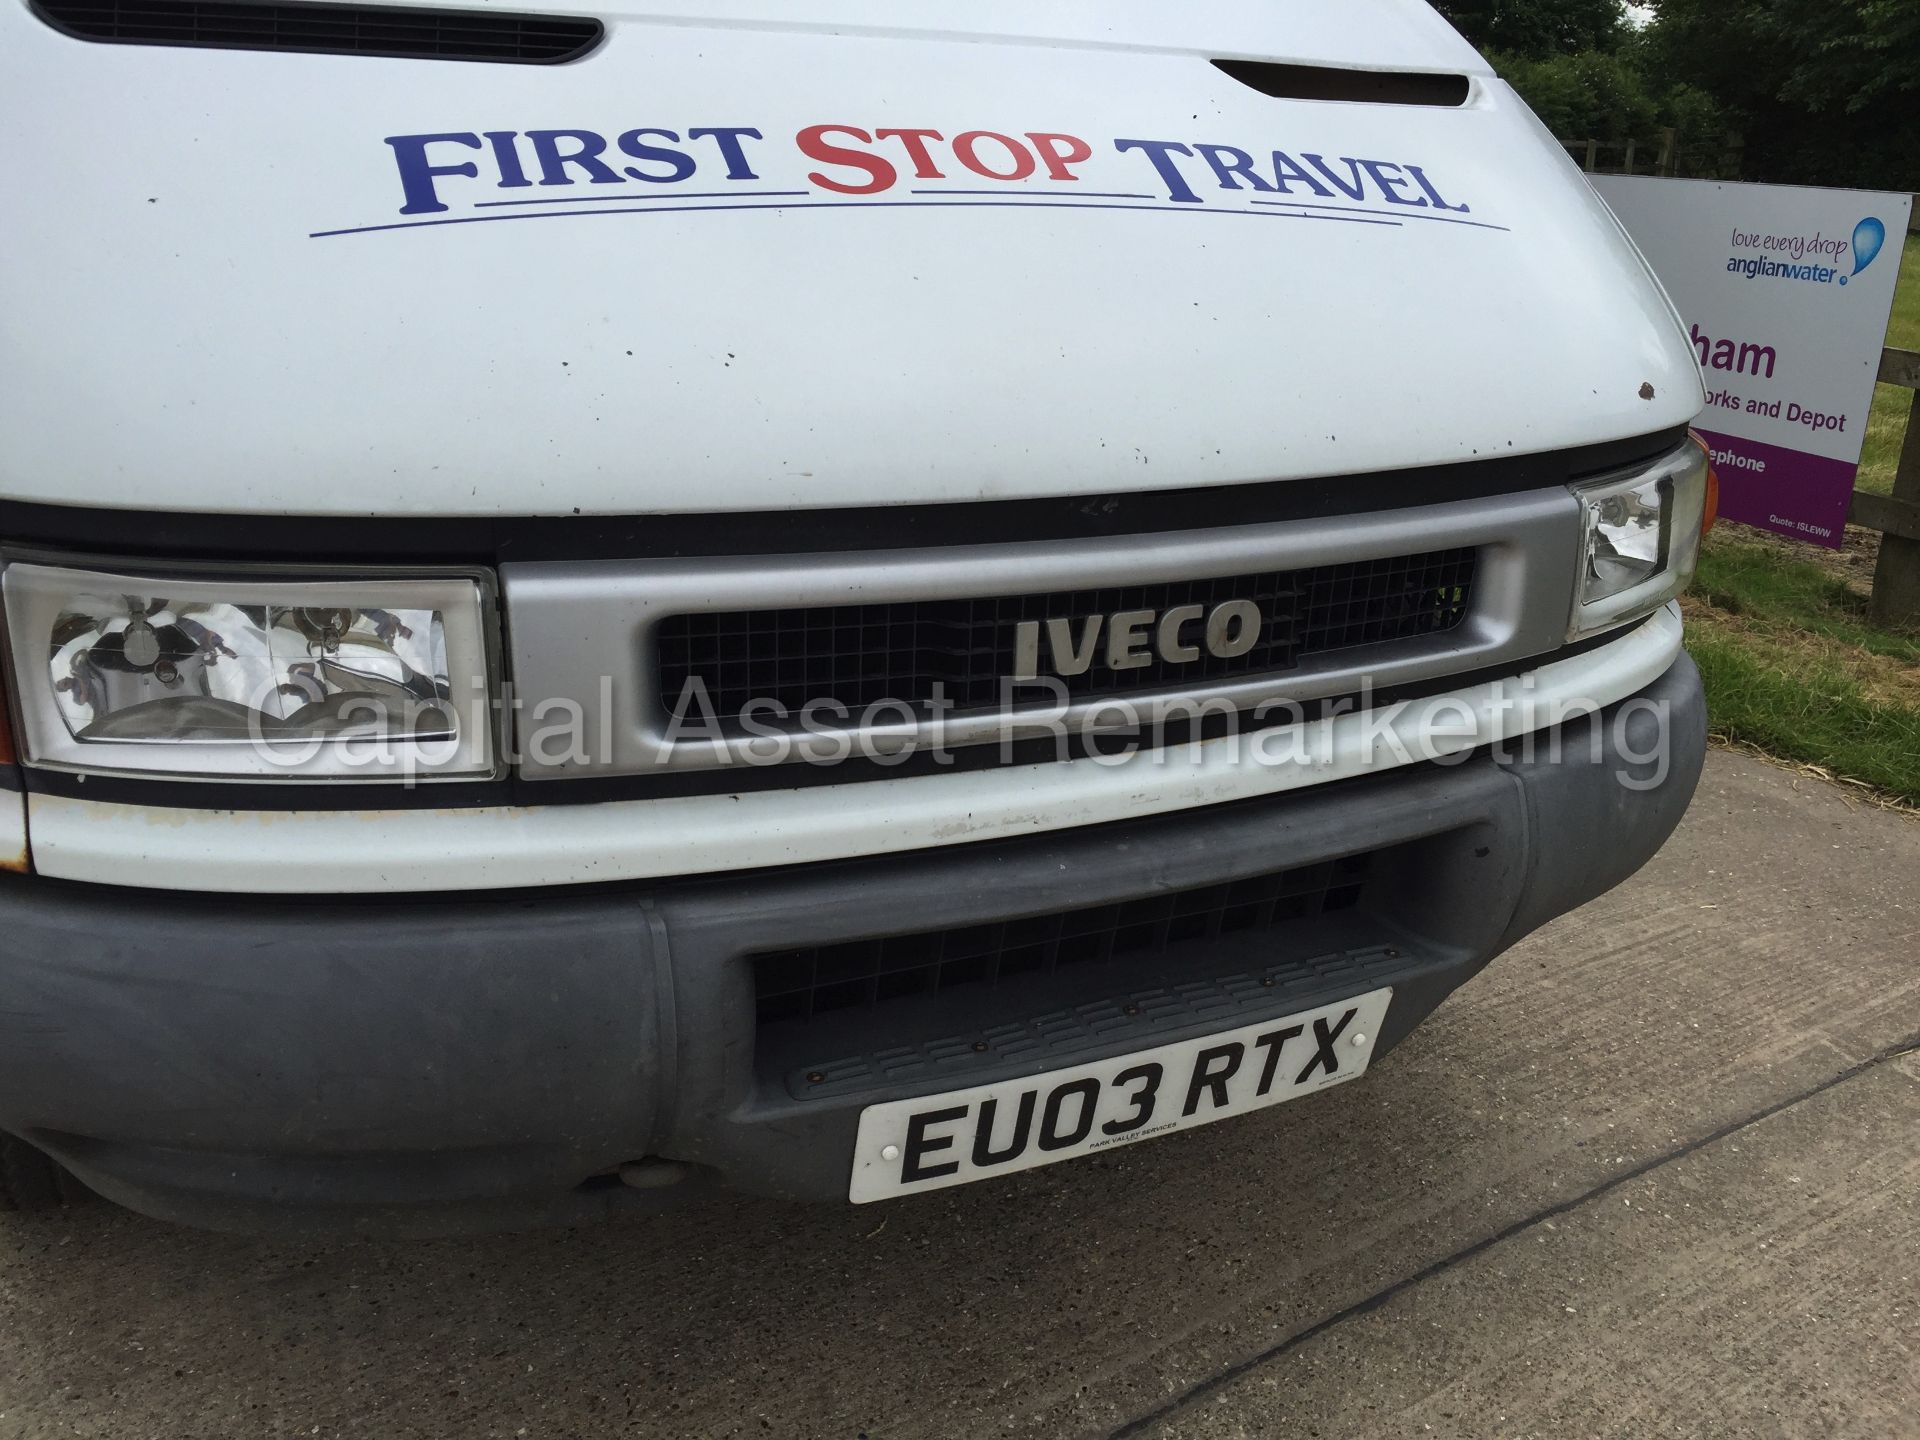 (on sale) IVECO DAILY 35S13 '14 SEATER MINI-BUS' (2003 - 03 REG) '2.3 DIESEL - 6 SPEED' (NO VAT) - Image 9 of 23